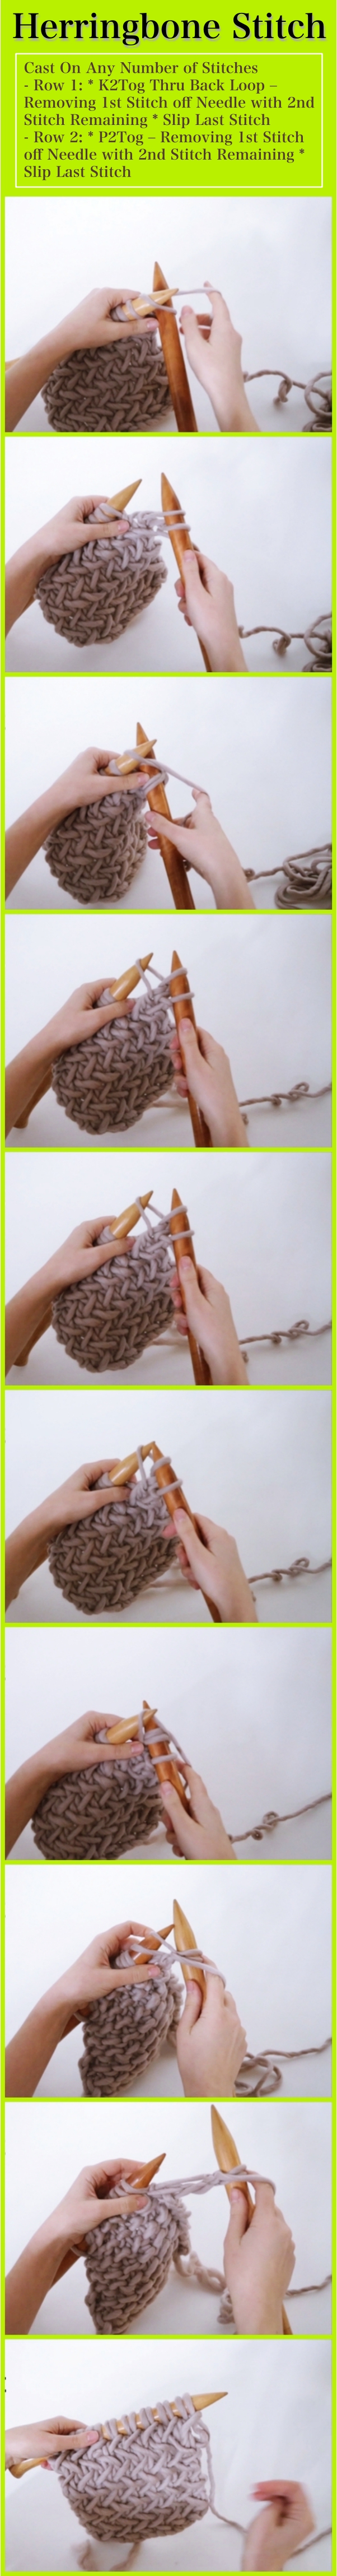 Easy-Knitting-Stitches-Patterns-for-Beginners-Complete-Tutorials